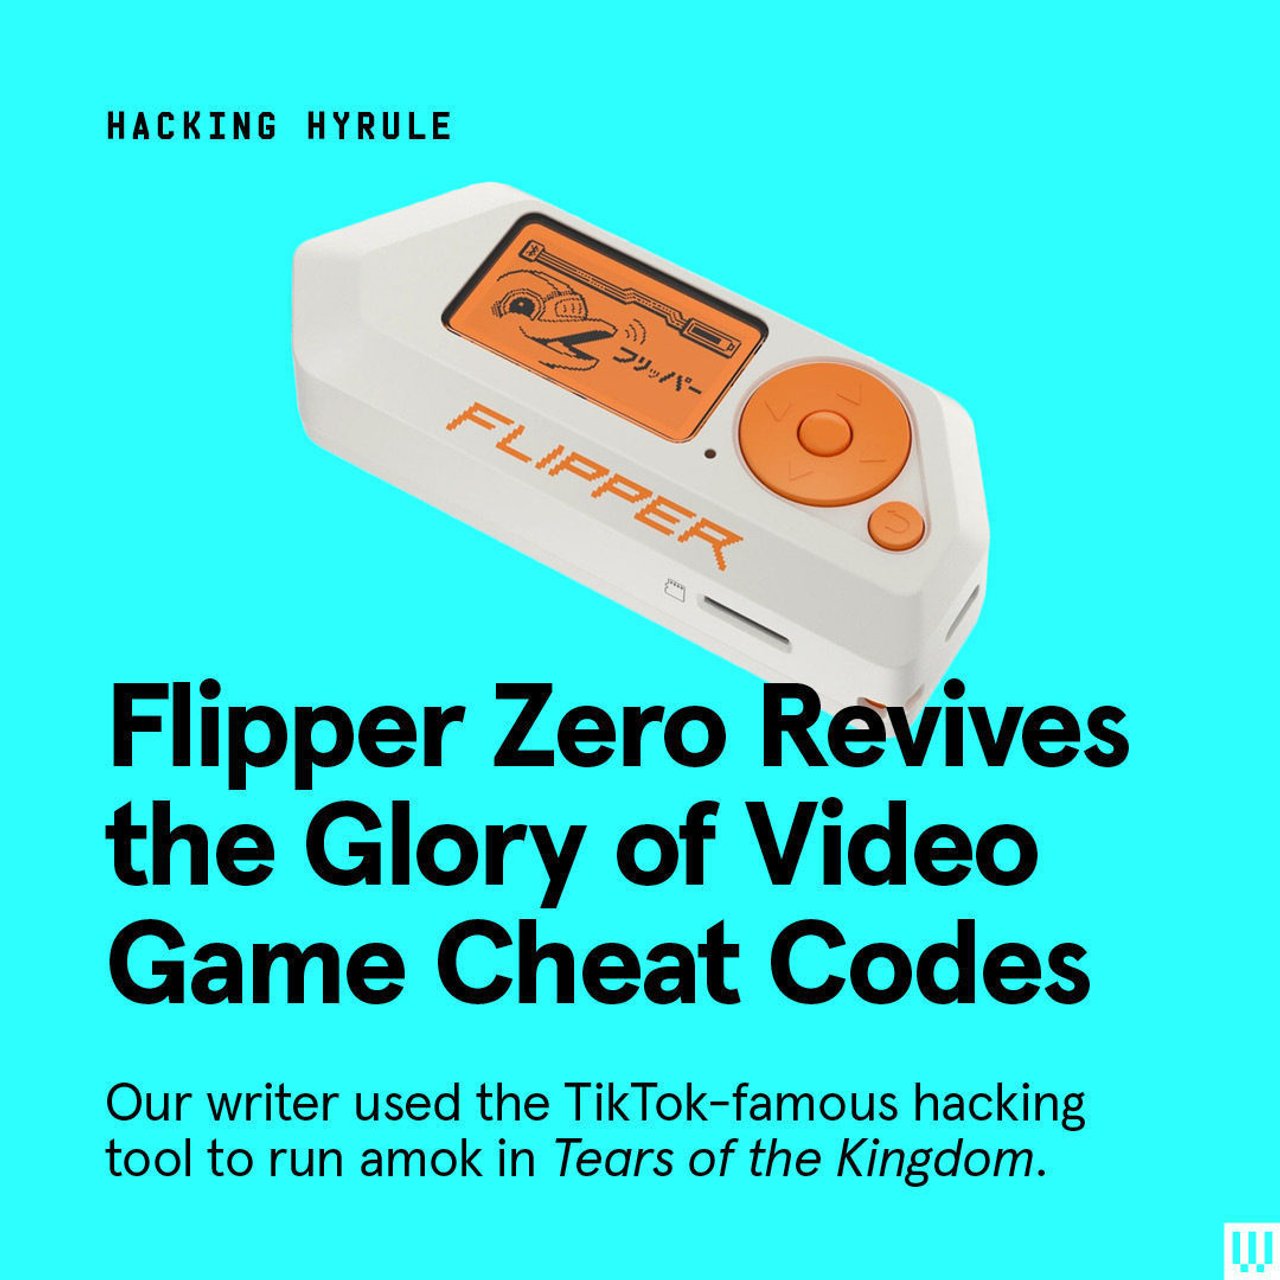 Flipper Zero: Can This Hacking Device Really Do Everything TikTok